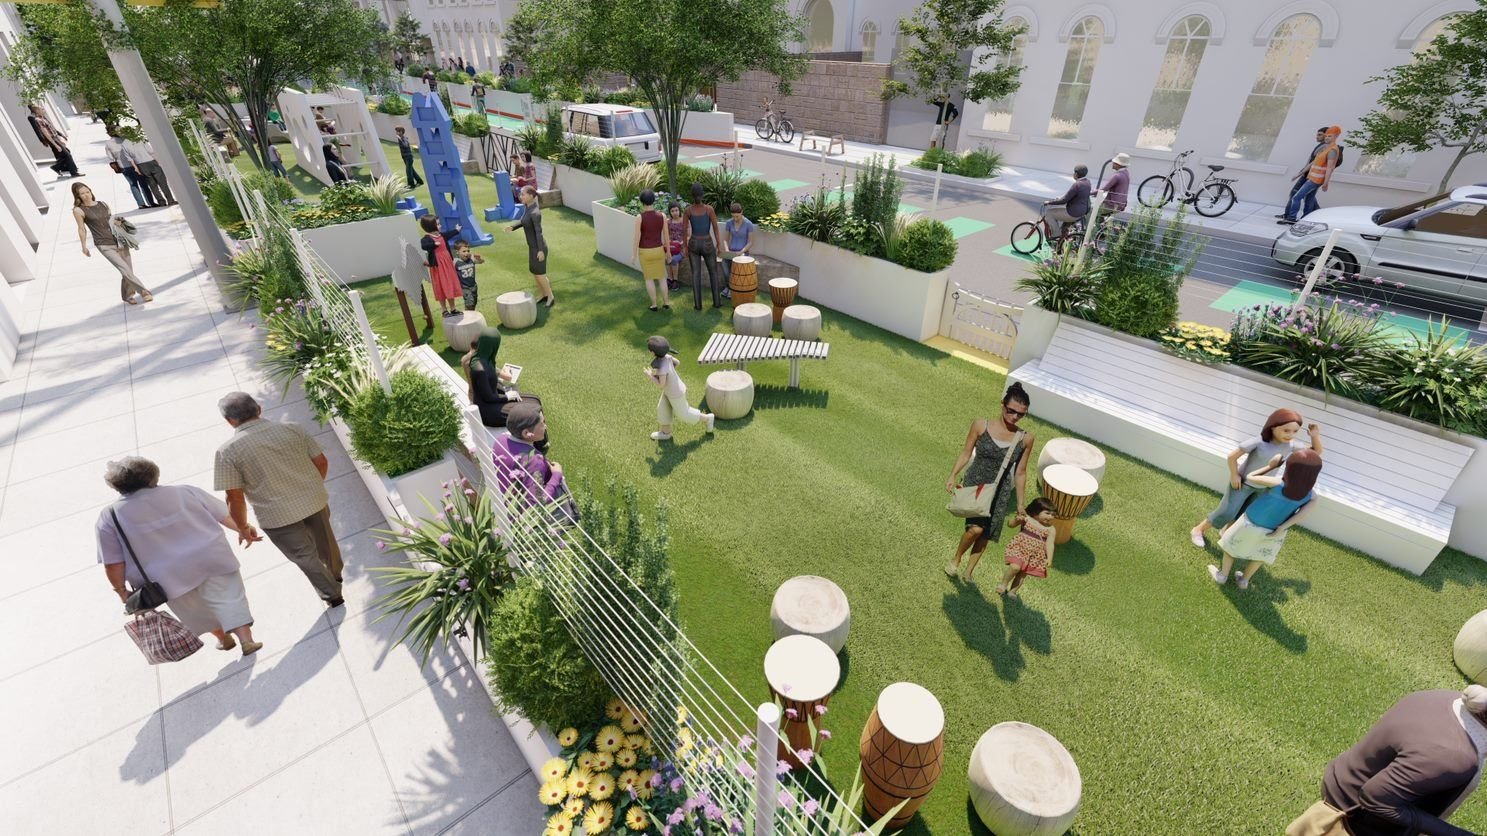 Viewed from above eye level, a rendering of a future pedestrian plaza shows grass, landscaping and people on a busy city street.